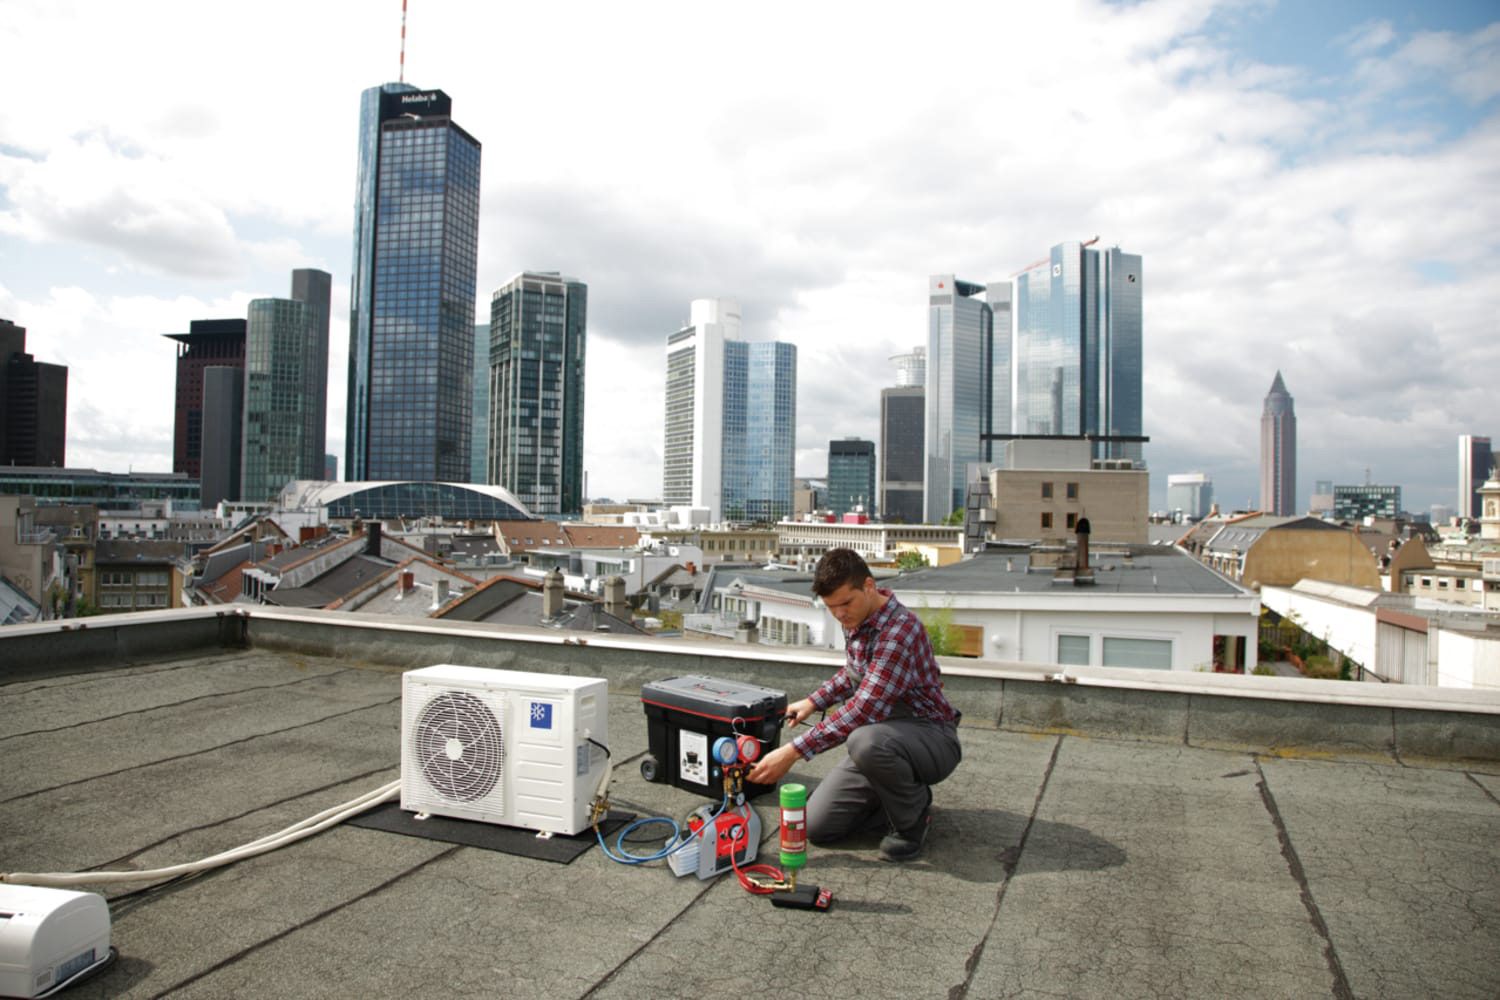 Rothenberger Roairvac Refrigerant Vacuum Pump in action on a rooftop.